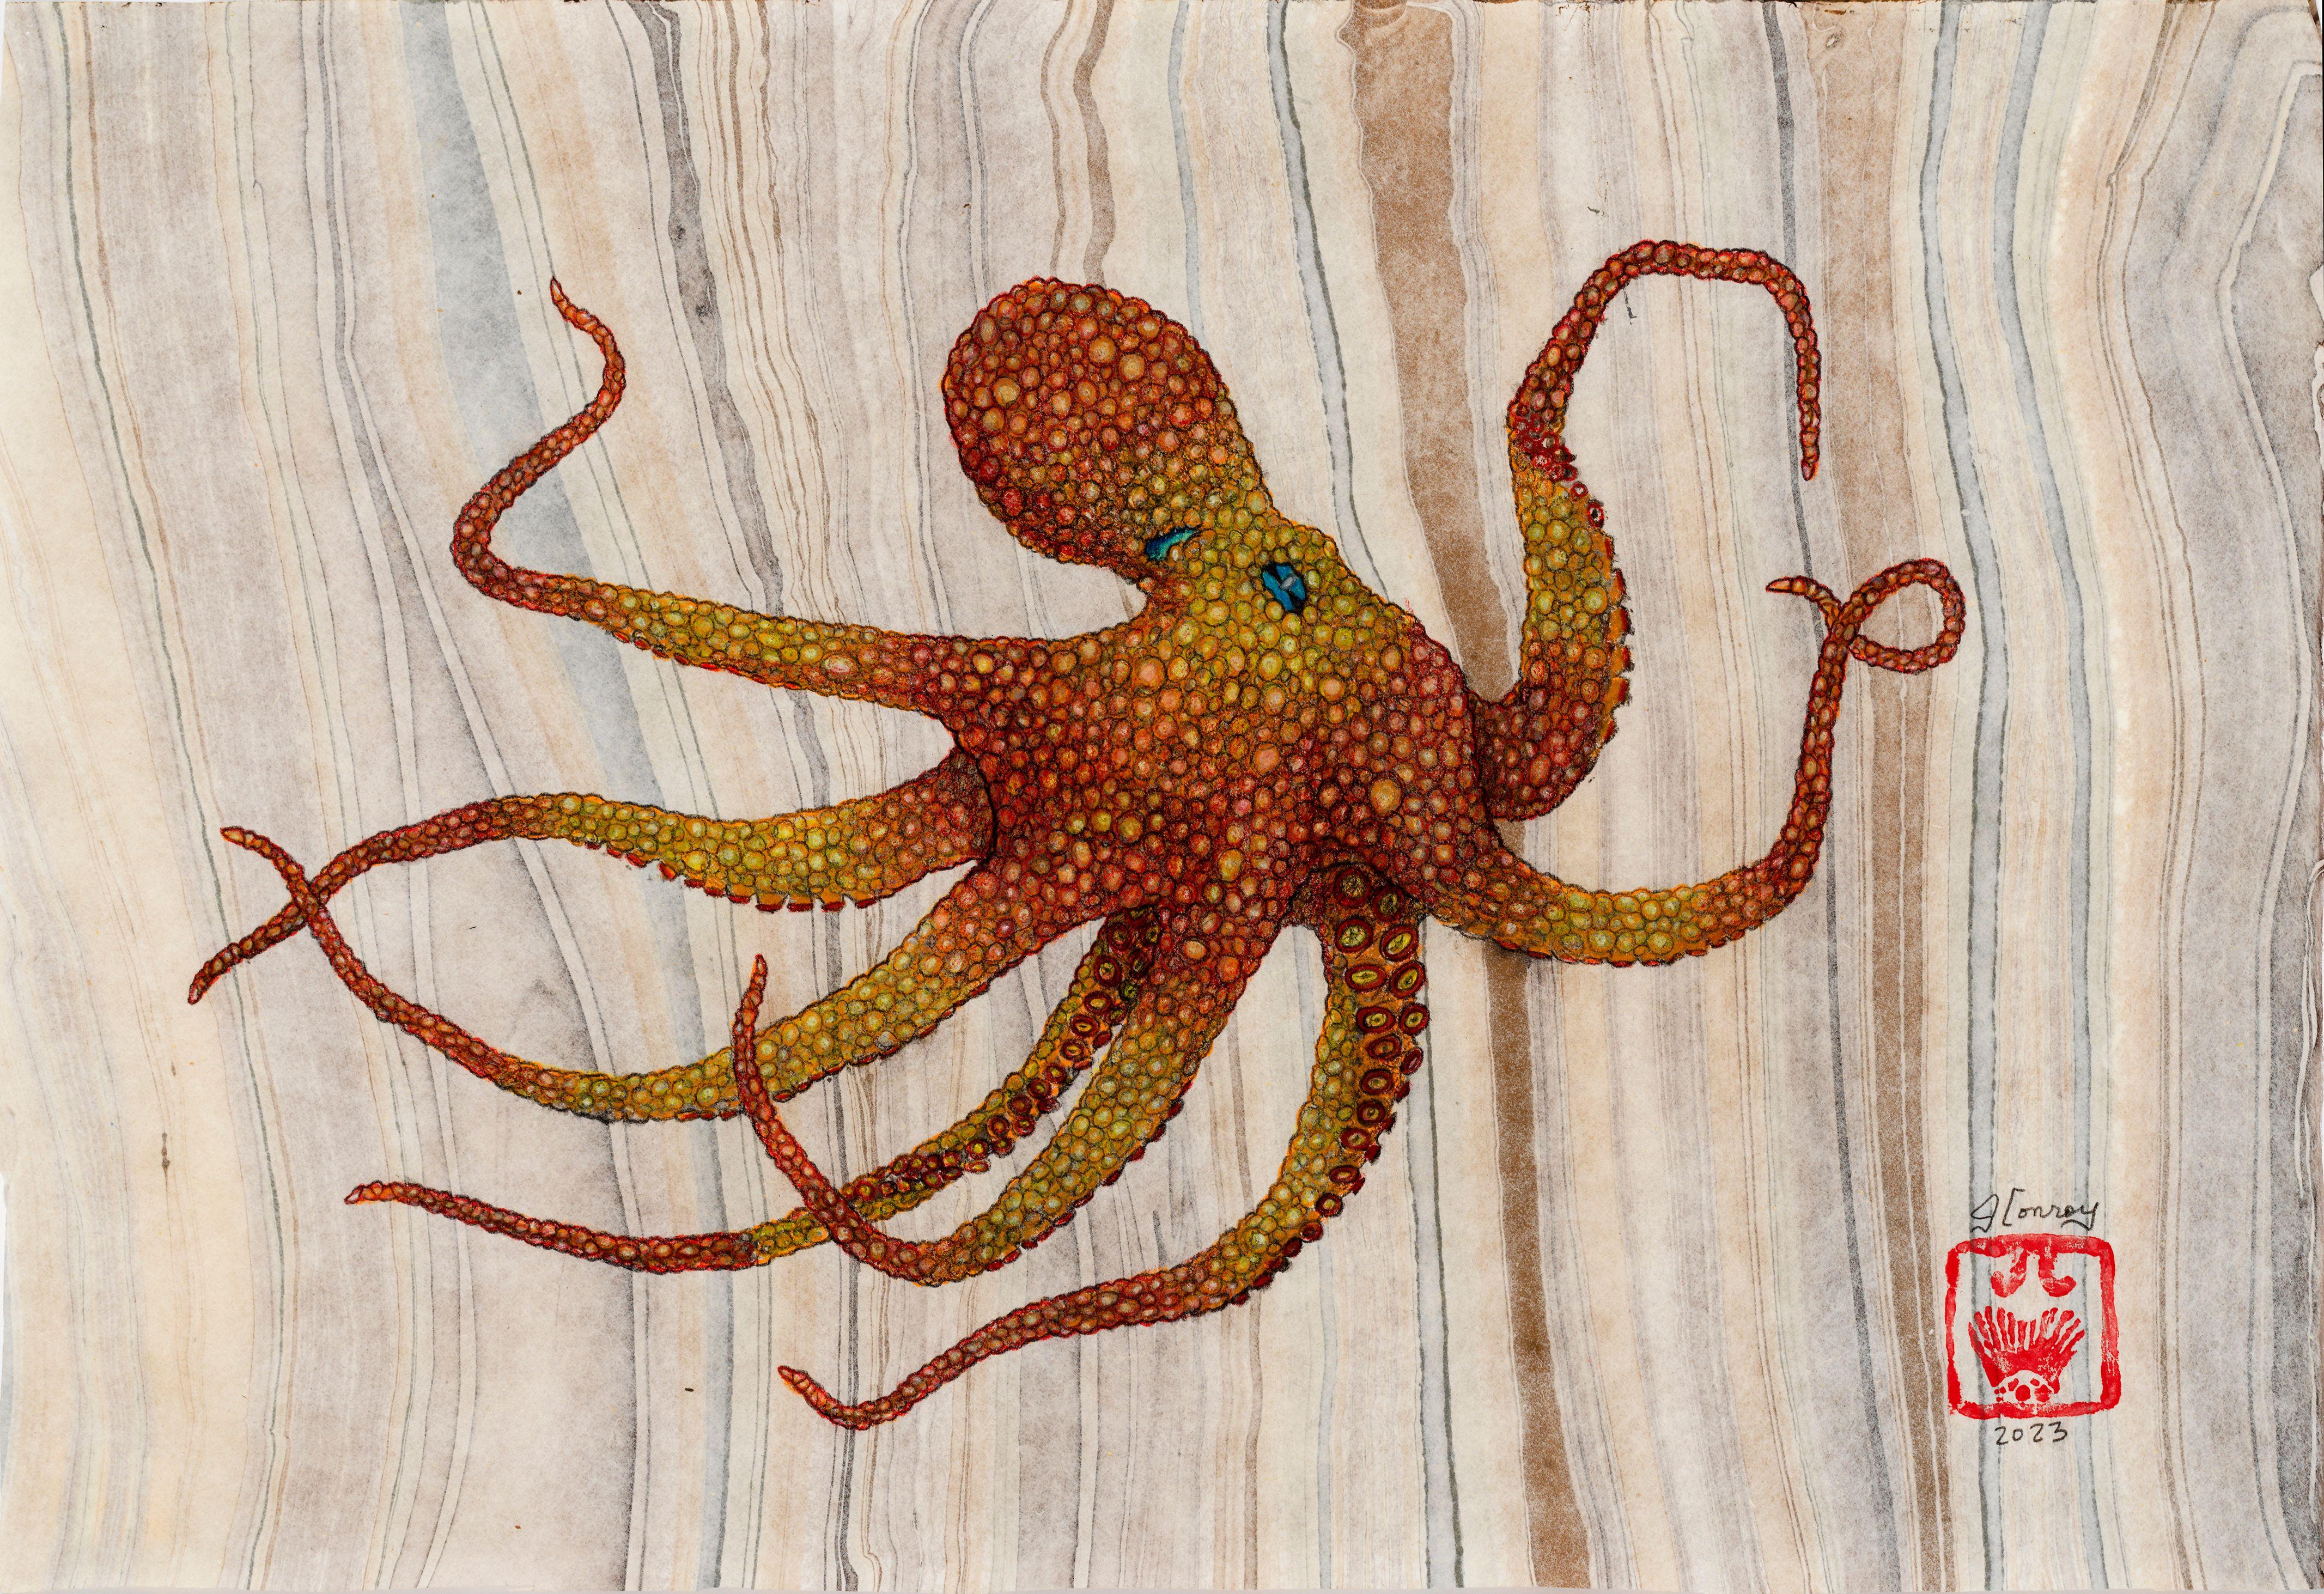 Jeff Conroy Animal Art - Stay Golden Pony Boy - Gyotaku Style Sumi Ink Painting of an Octopus 